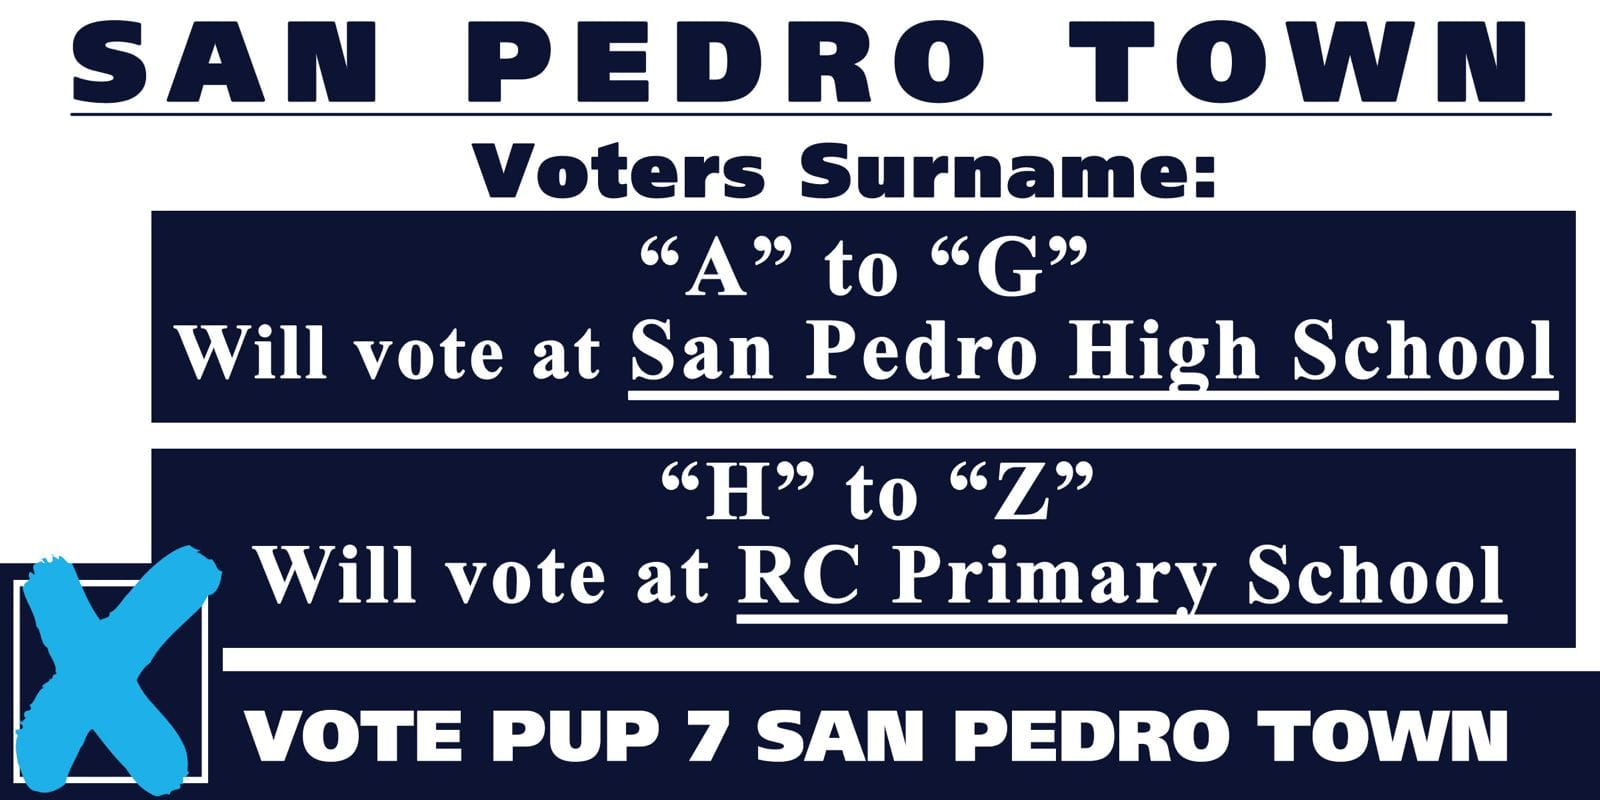 Polling stations in Ssan PEdro